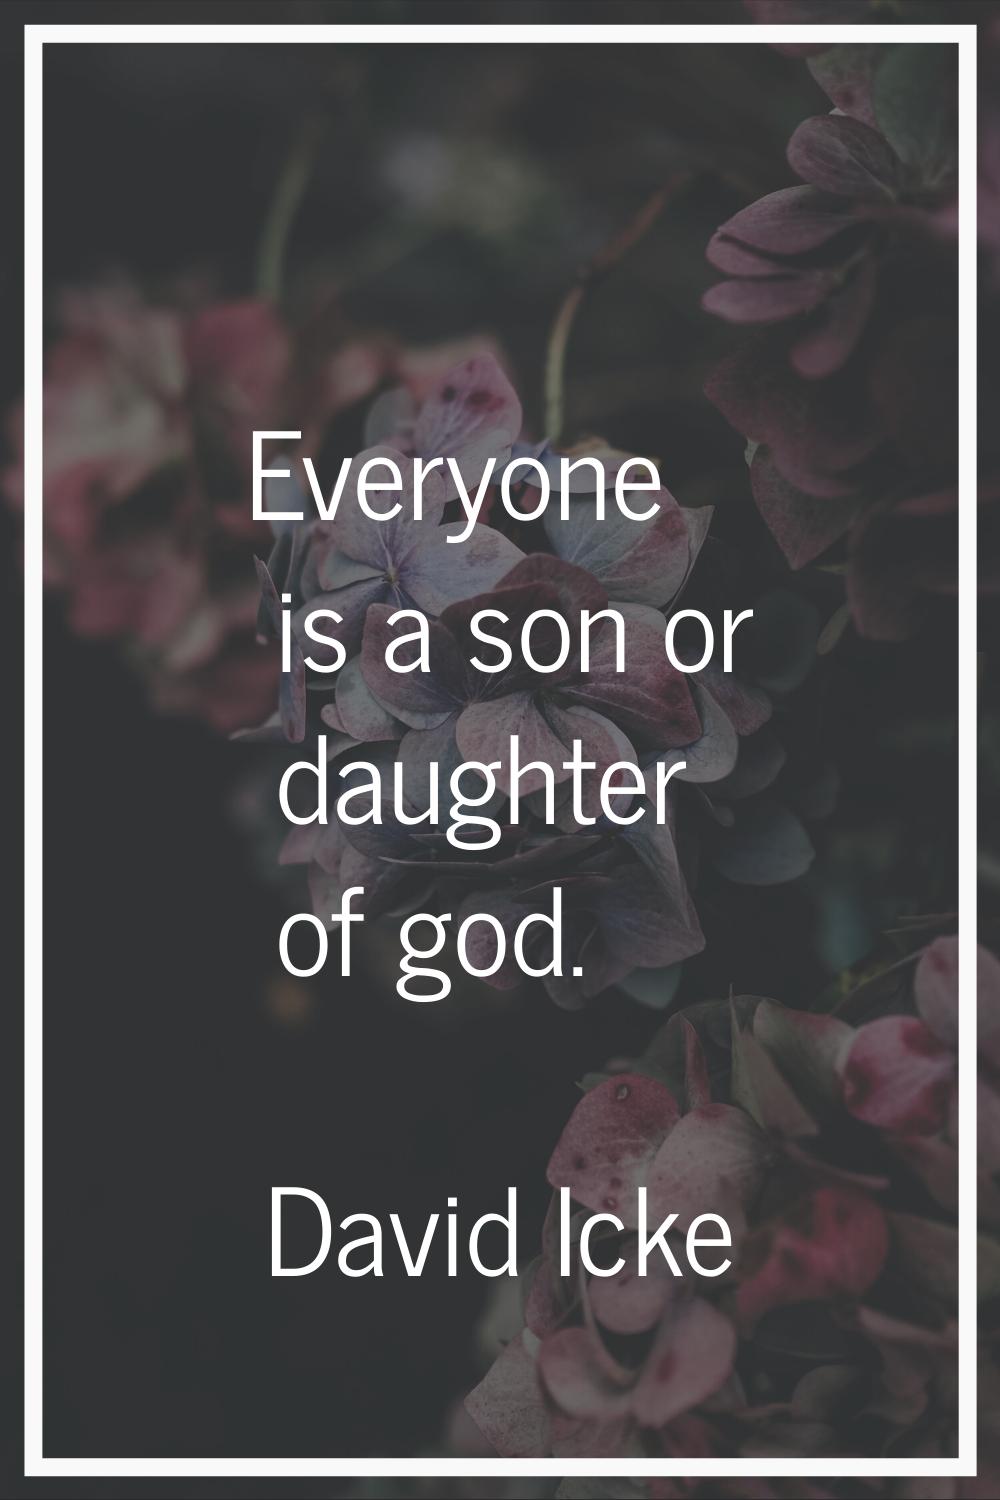 Everyone is a son or daughter of god.